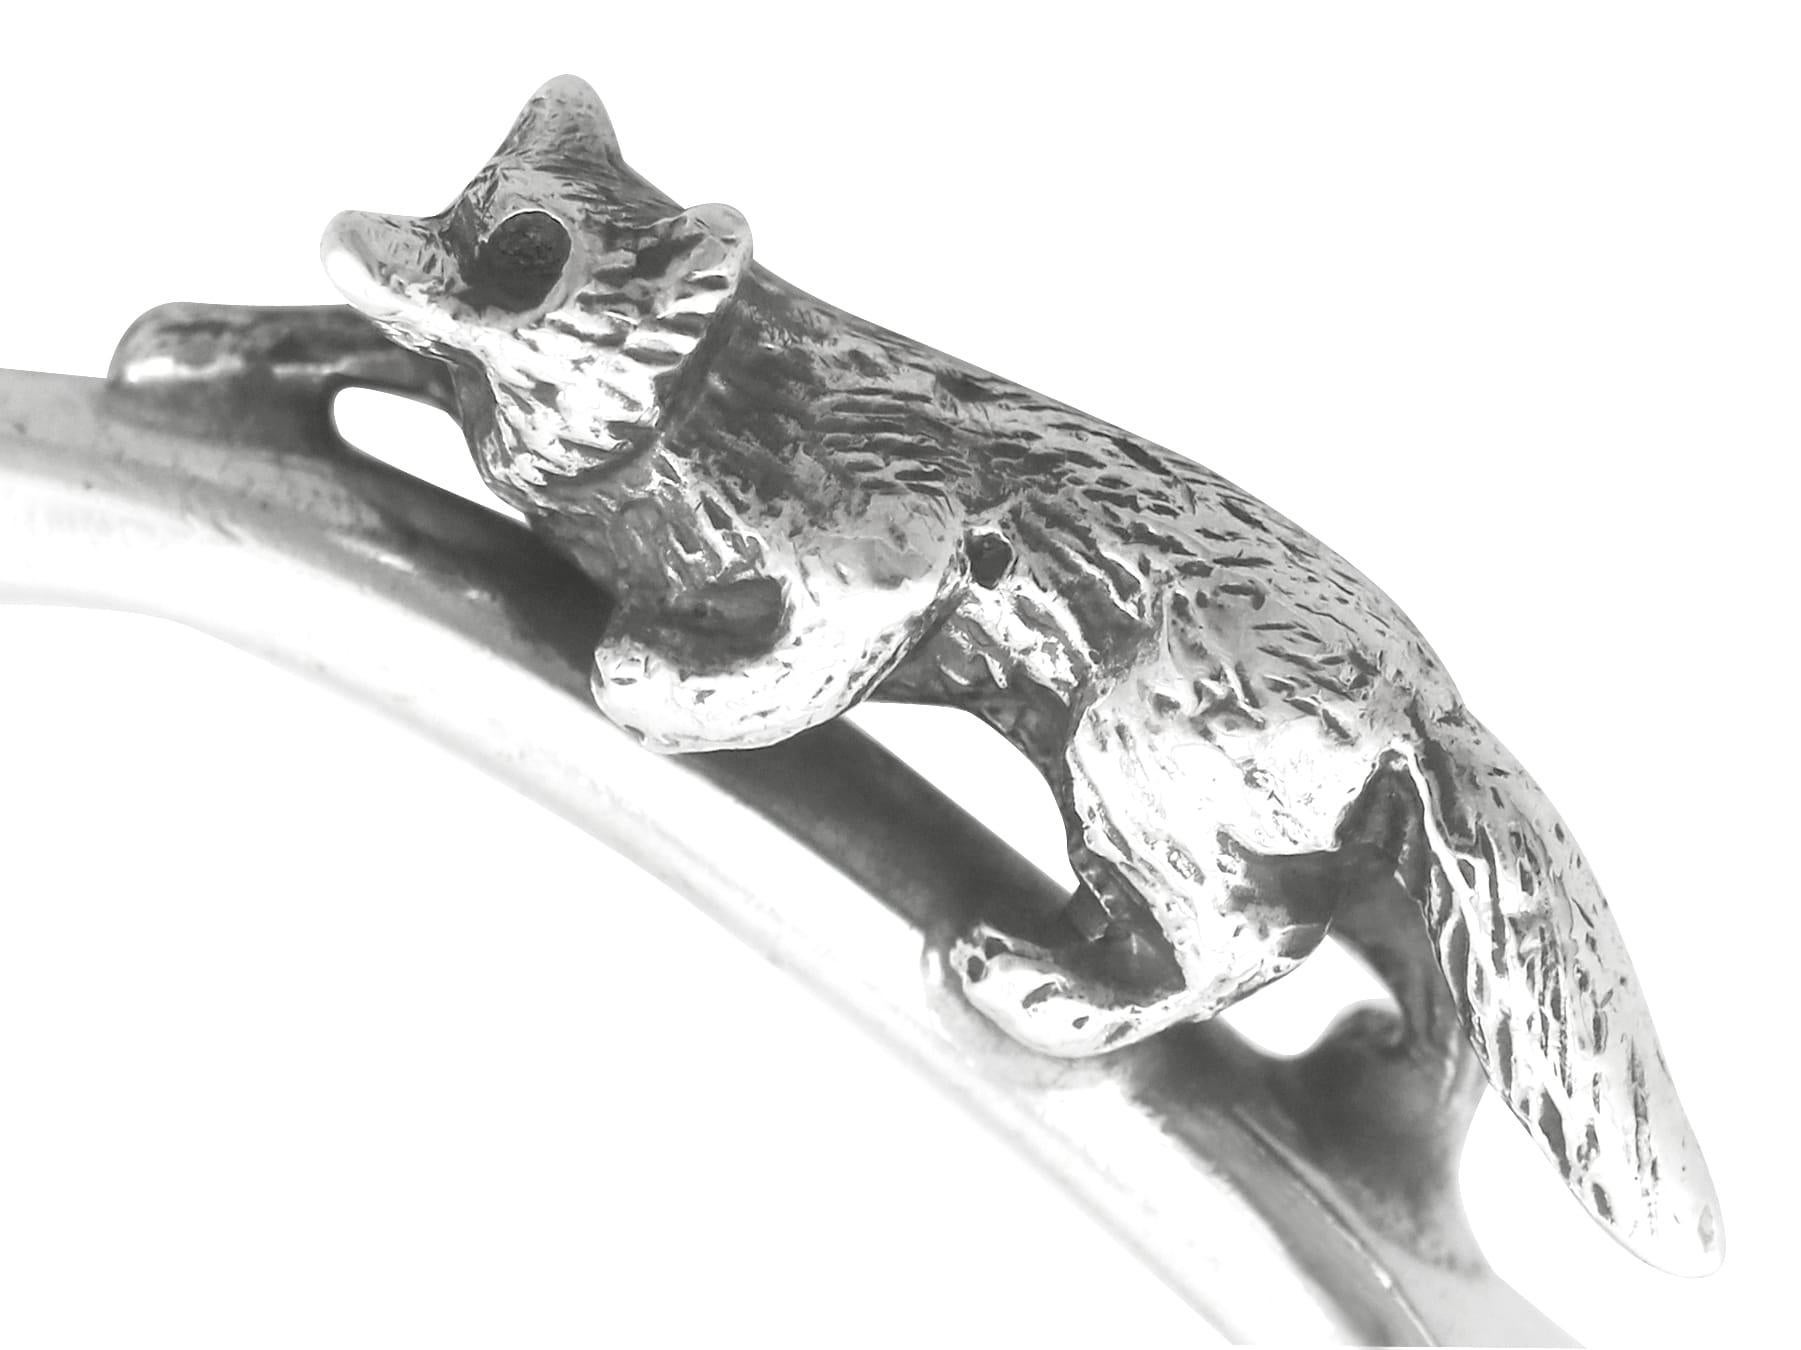 Vintage George VI Pair of Sterling Silver Fox Equestrian Napkin Rings In Excellent Condition For Sale In Jesmond, Newcastle Upon Tyne